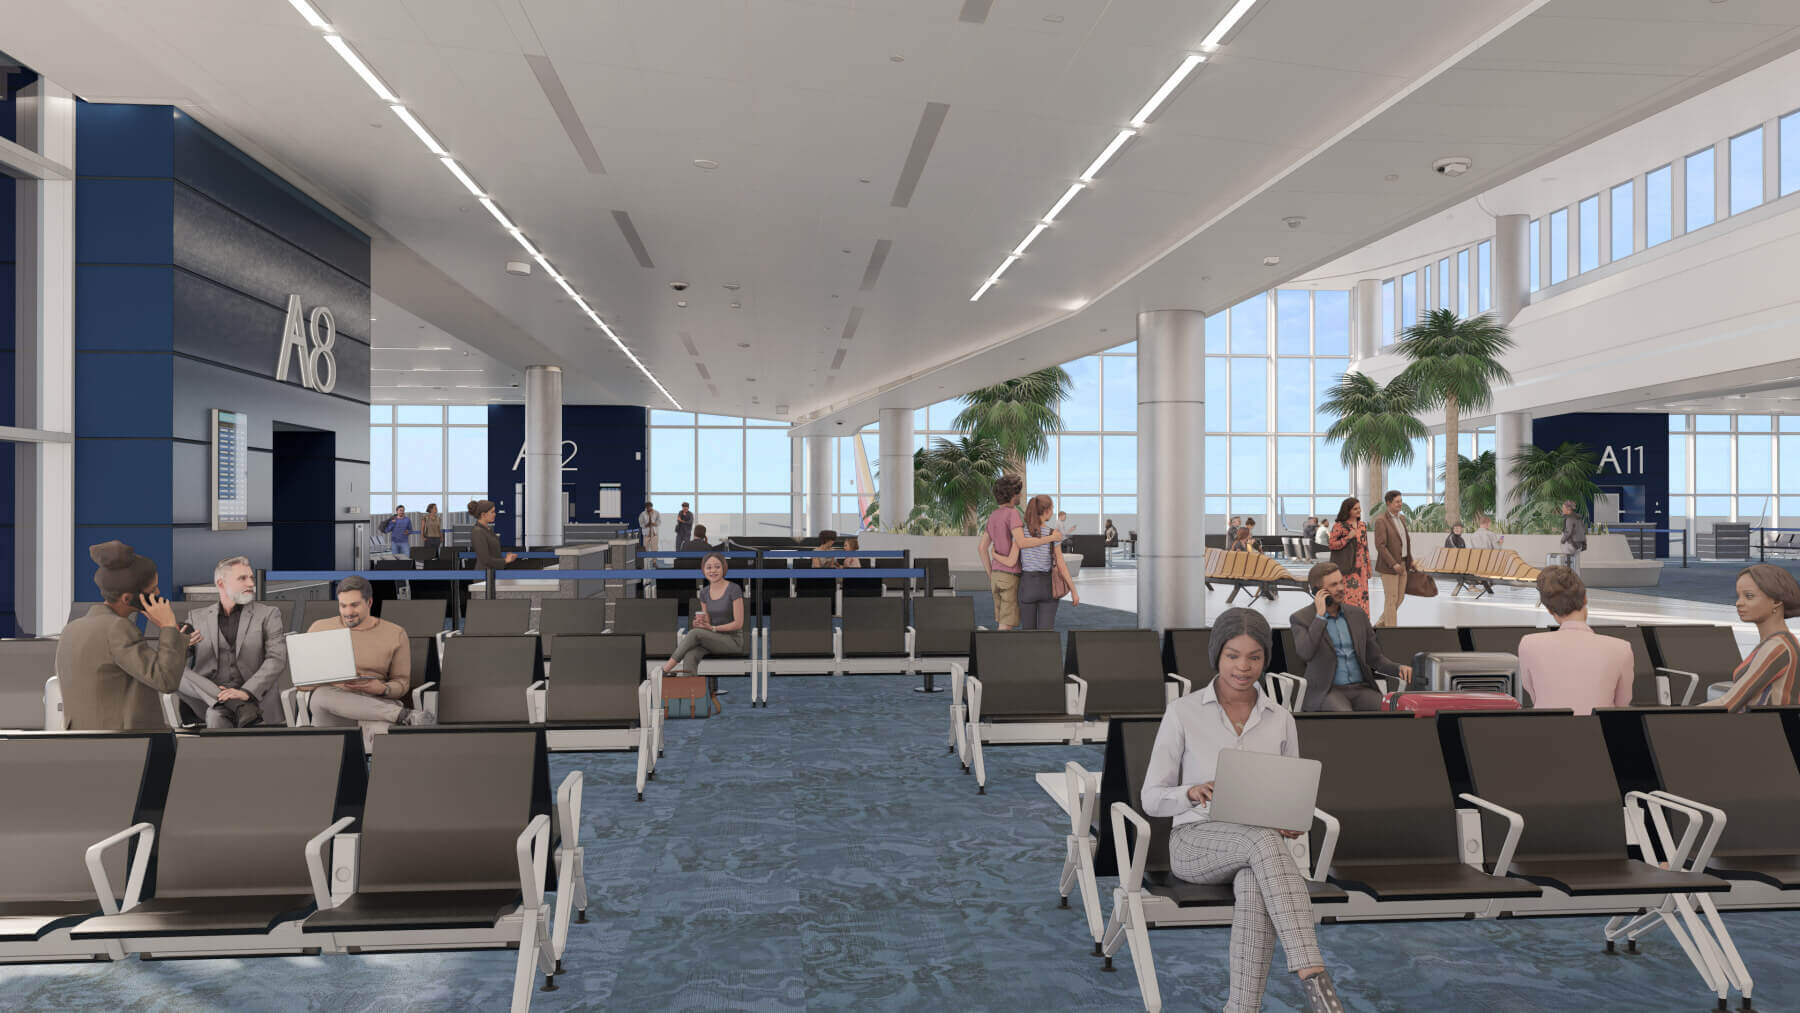 rendering of people sitting in the holdroom in Concourse A at Myrtle Beach International Airport